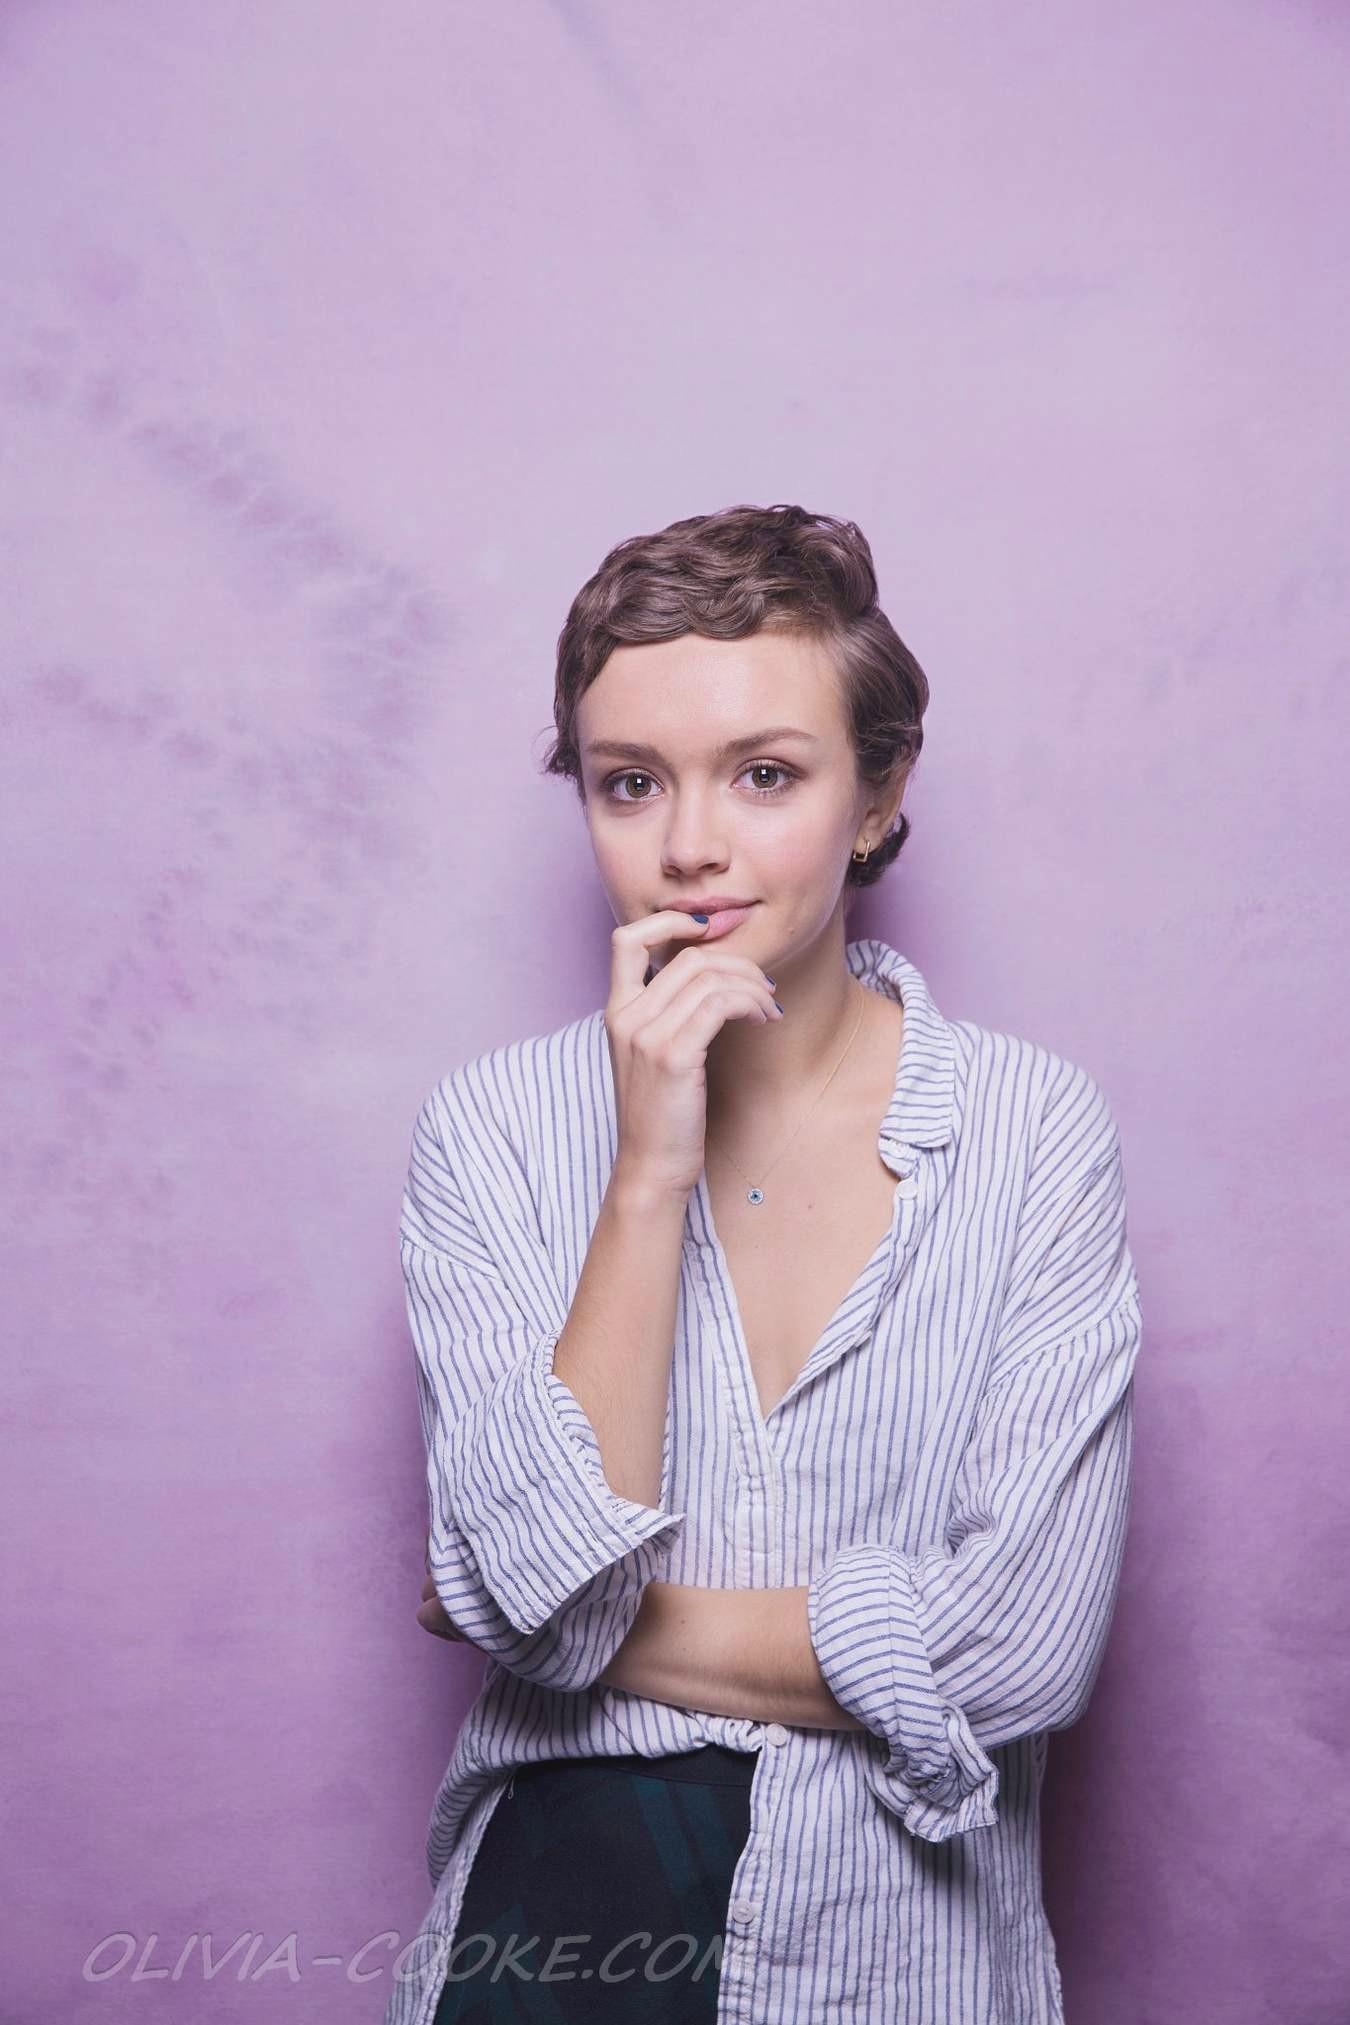 Olivia Cooke 2020 Wallpapers